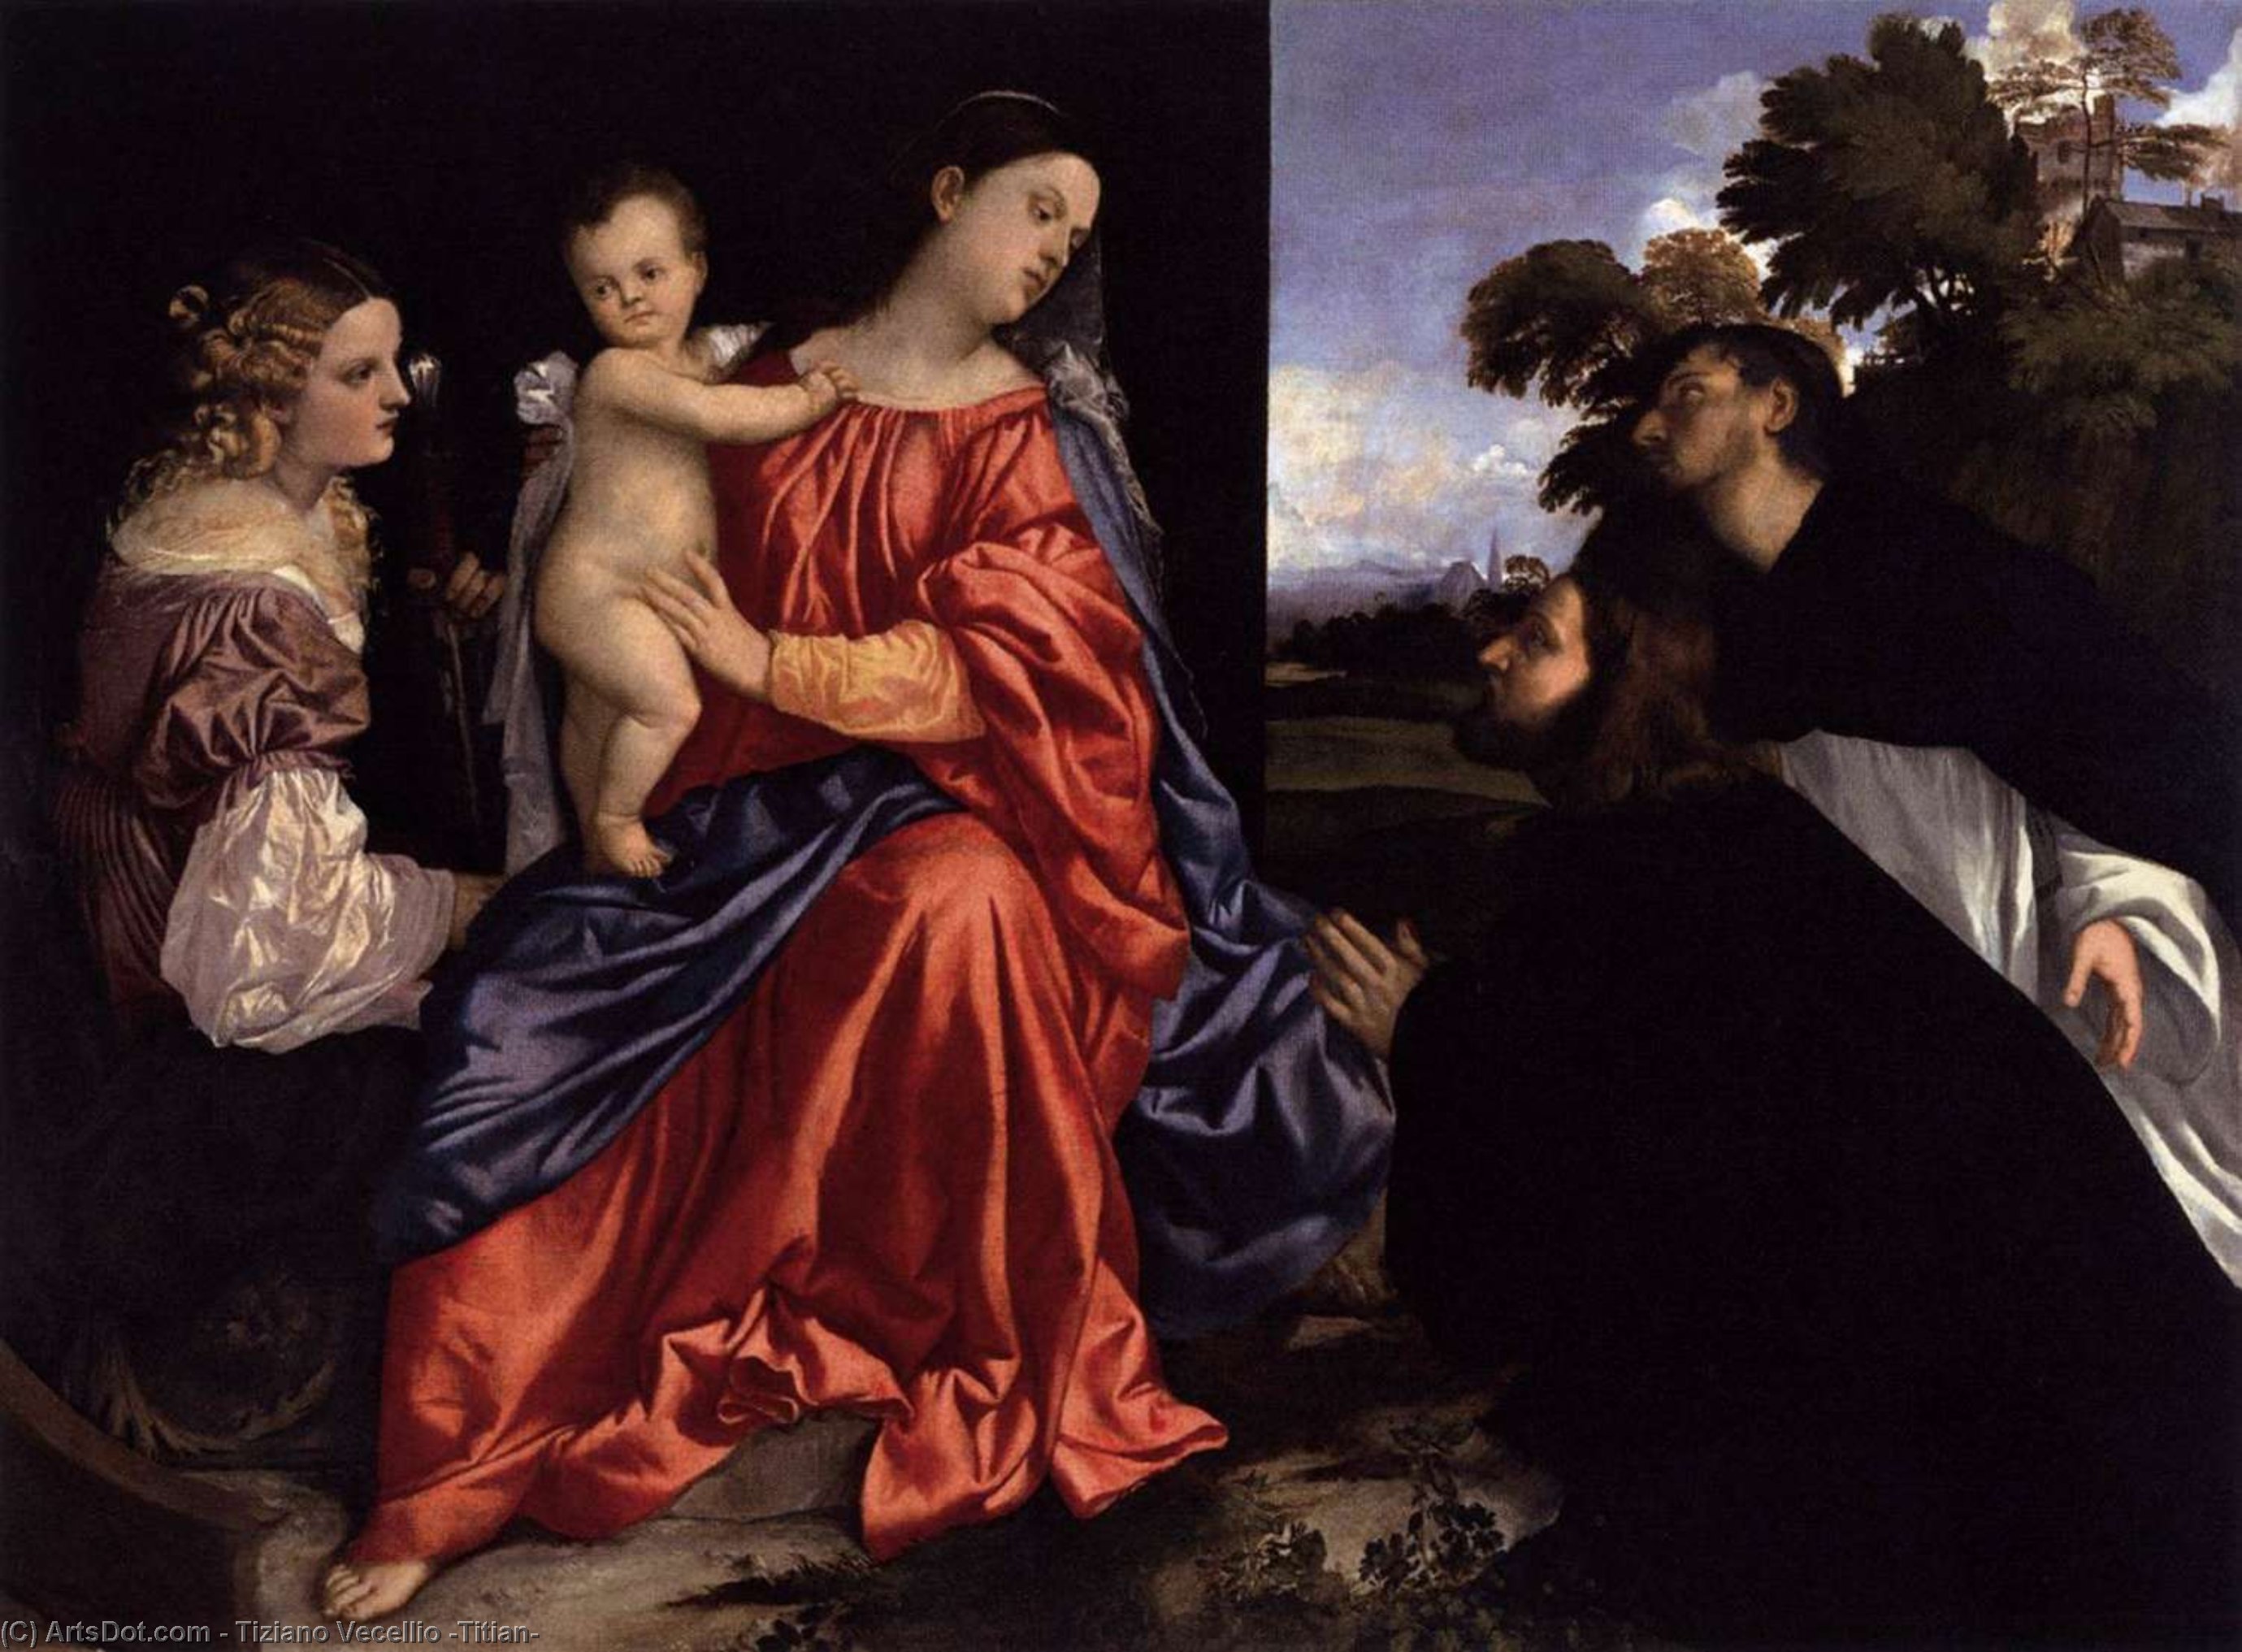 WikiOO.org - Güzel Sanatlar Ansiklopedisi - Resim, Resimler Tiziano Vecellio (Titian) - Madonna and Child with Sts Catherine and Dominic and a Donor